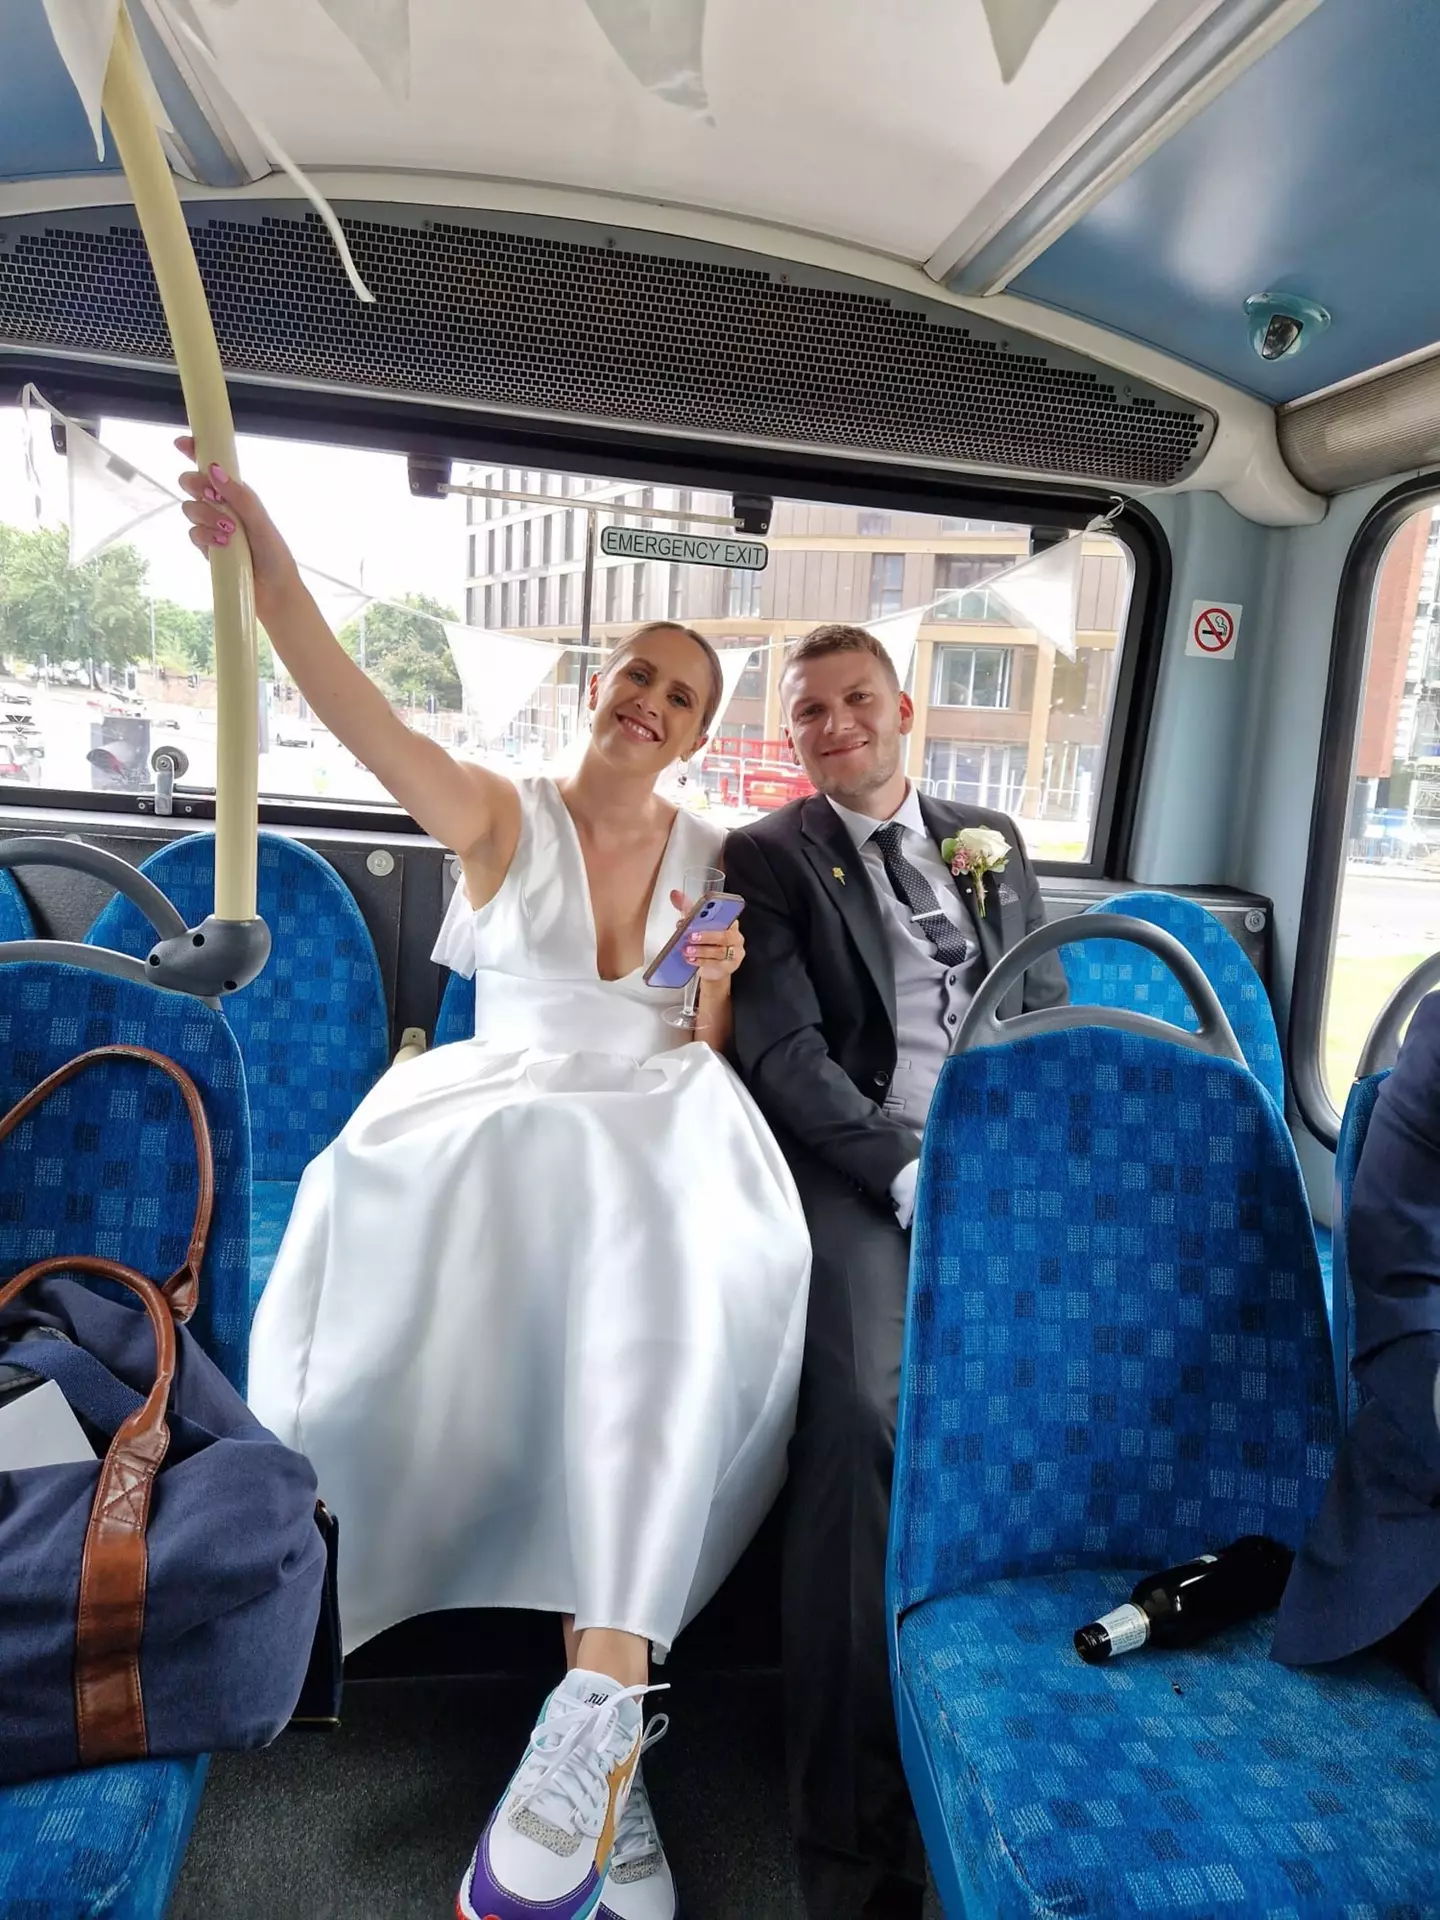 The couple saved big time on their wedding transport.